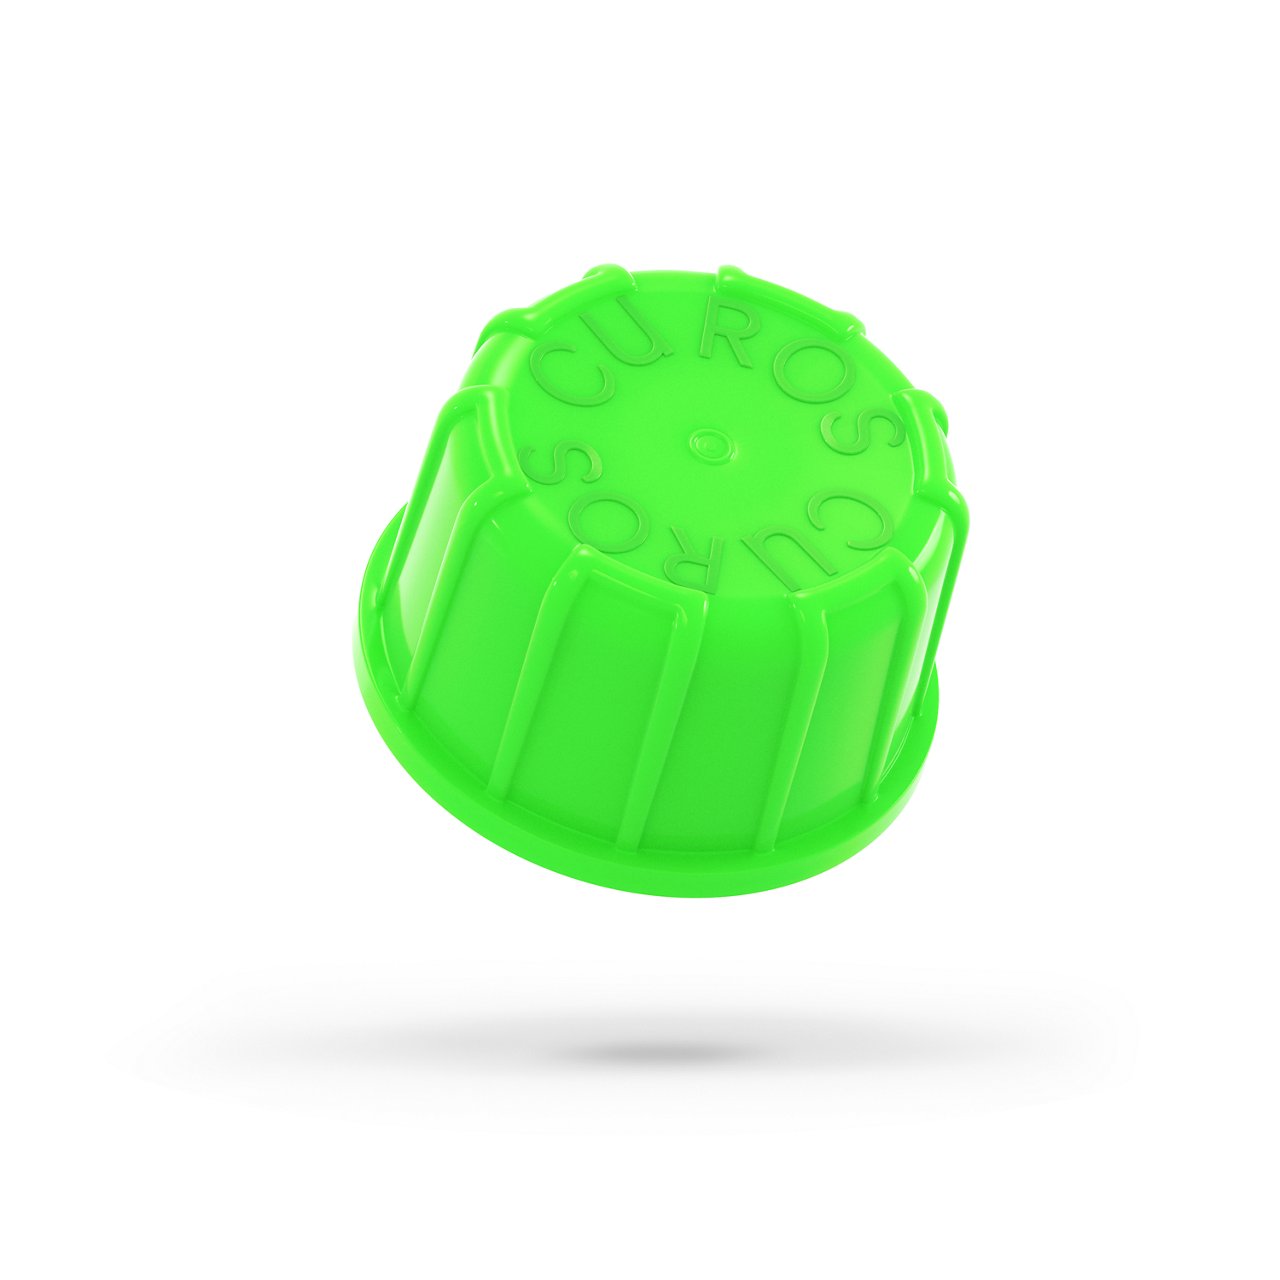 Rendered image of the outer portion of a 3M™ Curos™ Disinfecting Cap for Needleless Connector